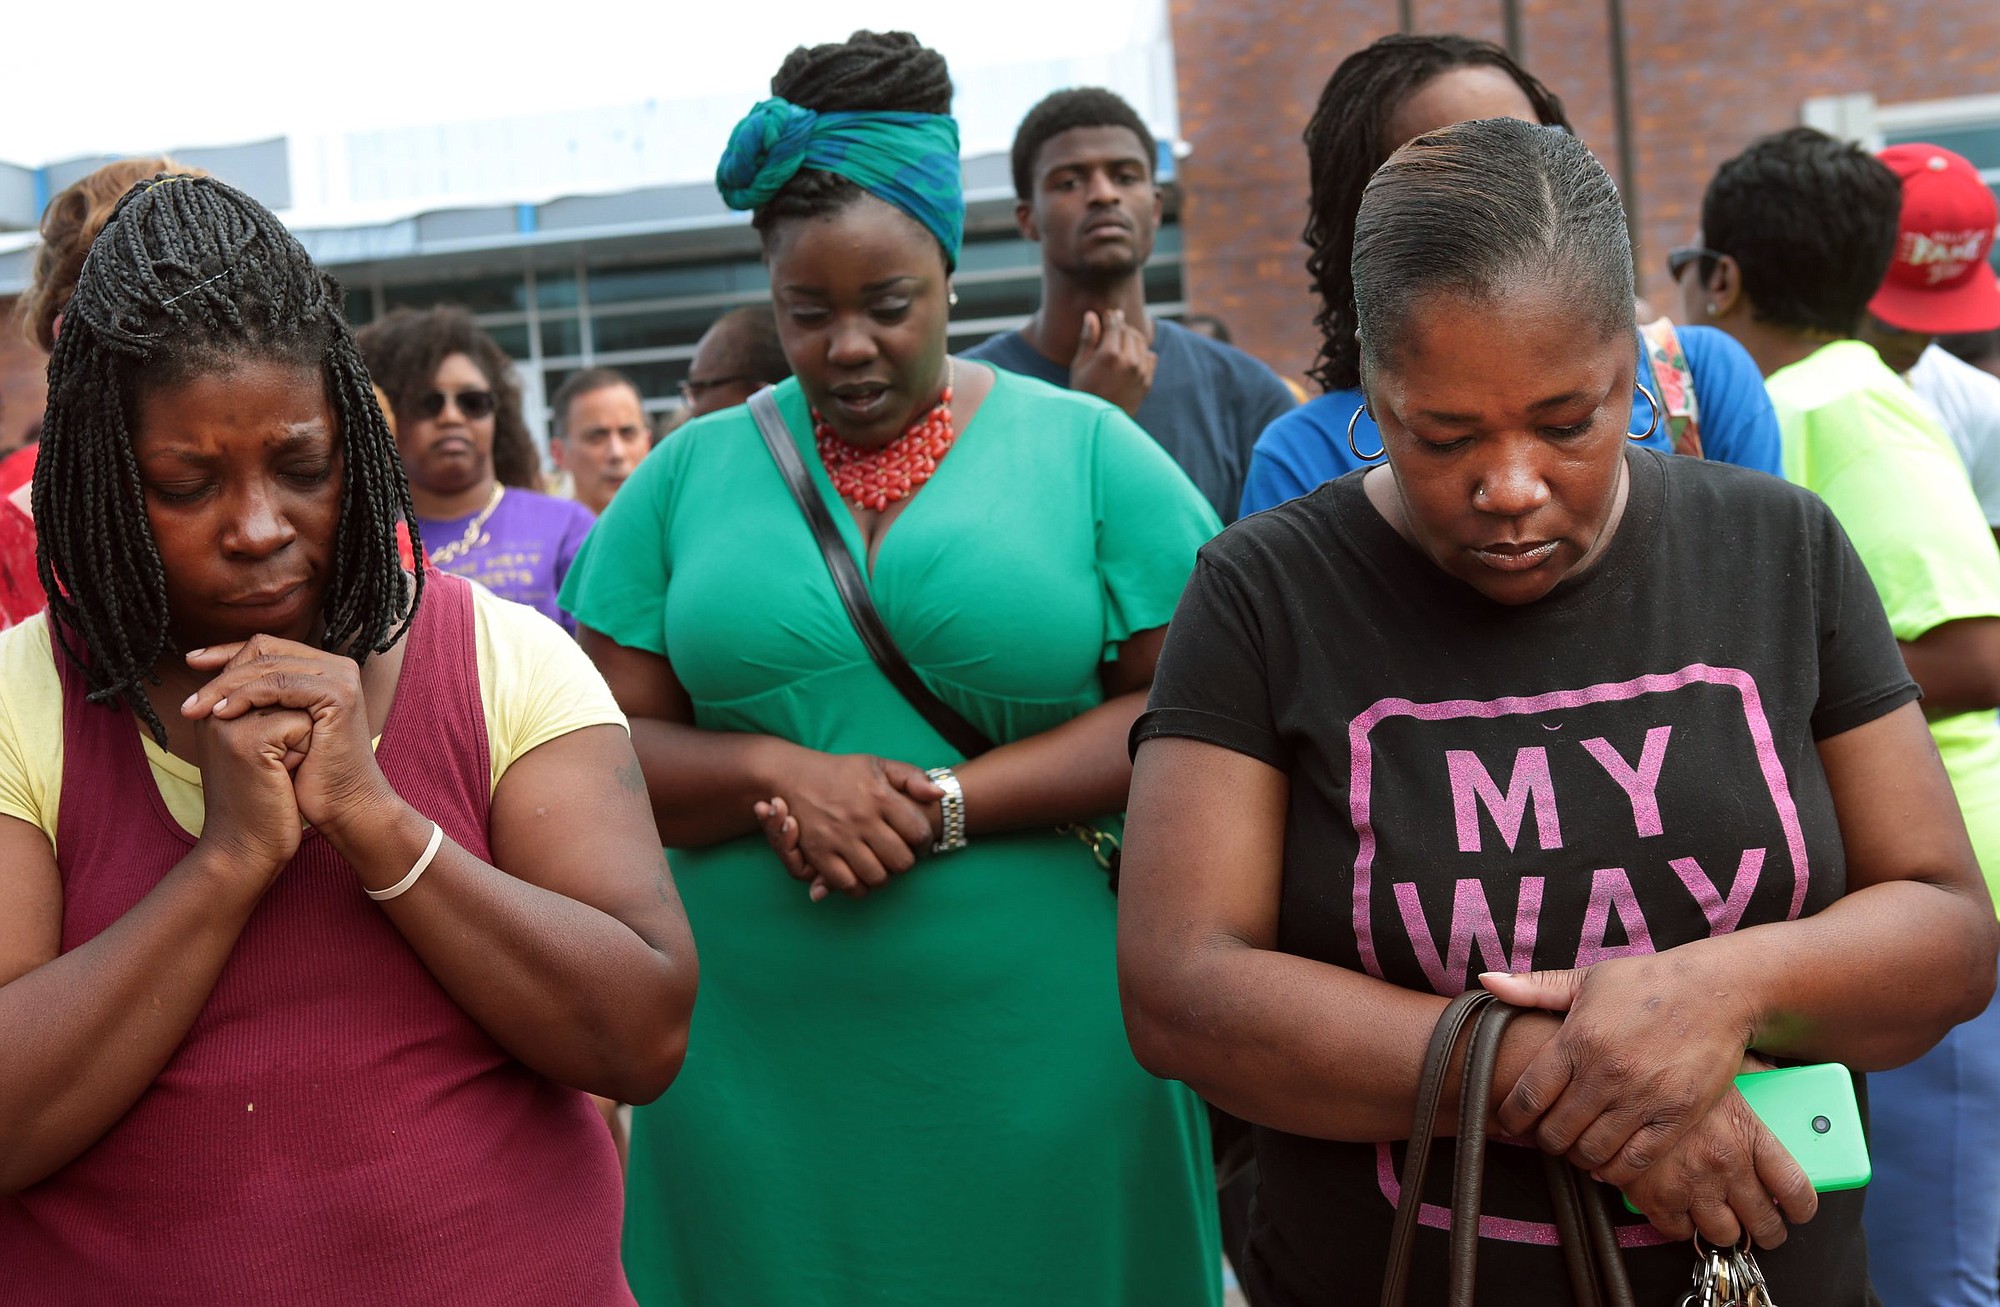 A prayer vigil was held Sunday in front of the Ferguson, Mo., police department, one day after a Ferguson officer shot and killed Michael Brown. From left are Martha Hightower, Leah Clyburn and Marie Wilson.